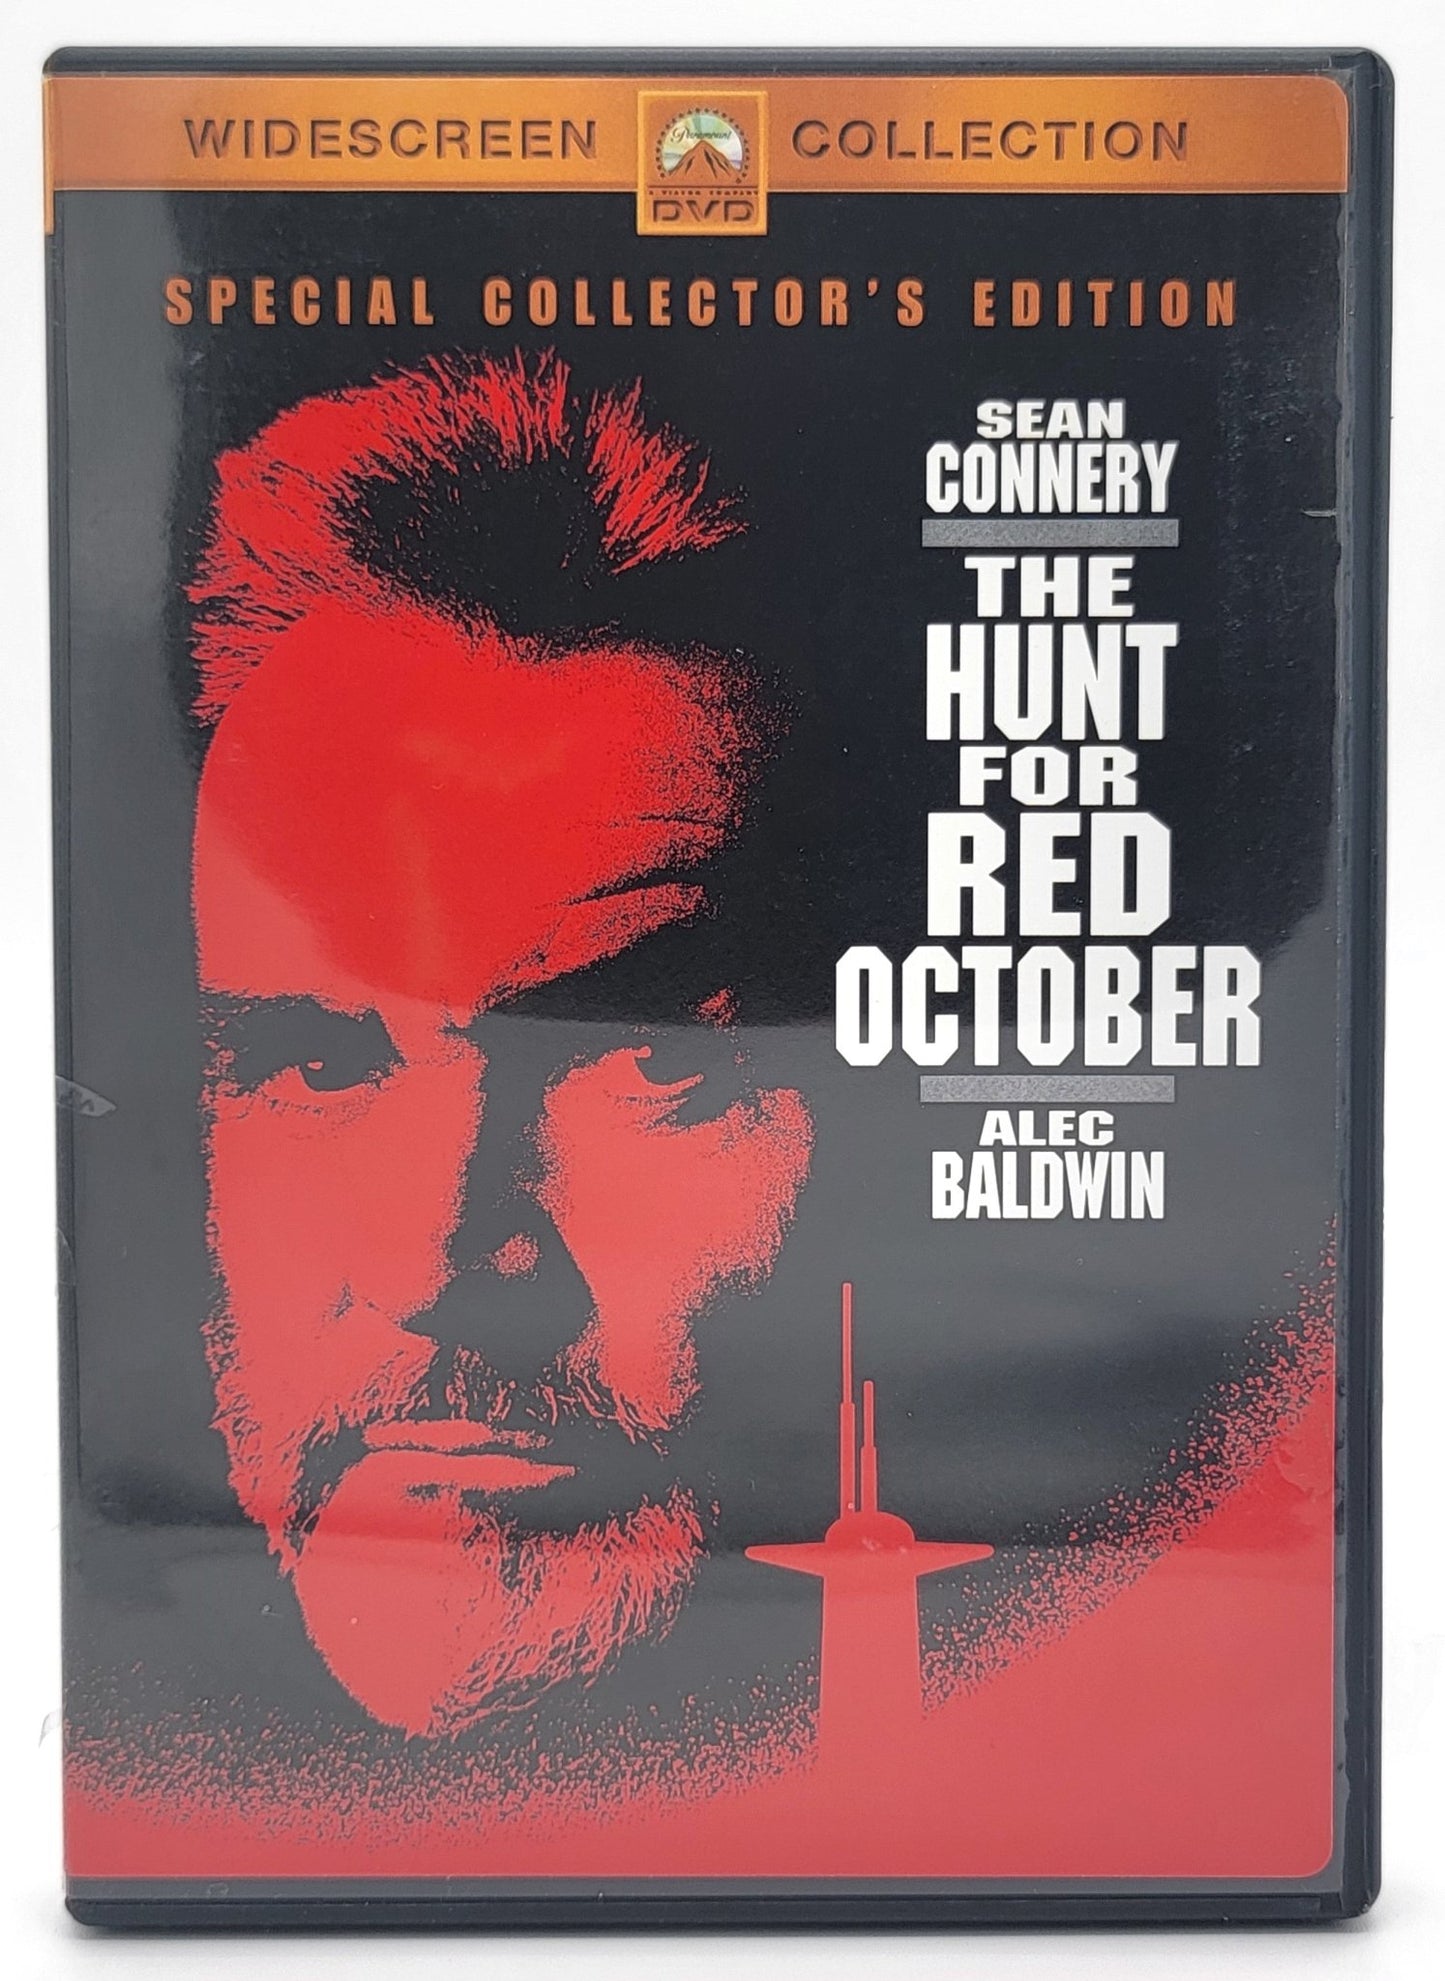 Paramount Home Entertainment - The Hunt for Red October | DVD | Special Collector's Edition - Widescreen - DVD - Steady Bunny Shop